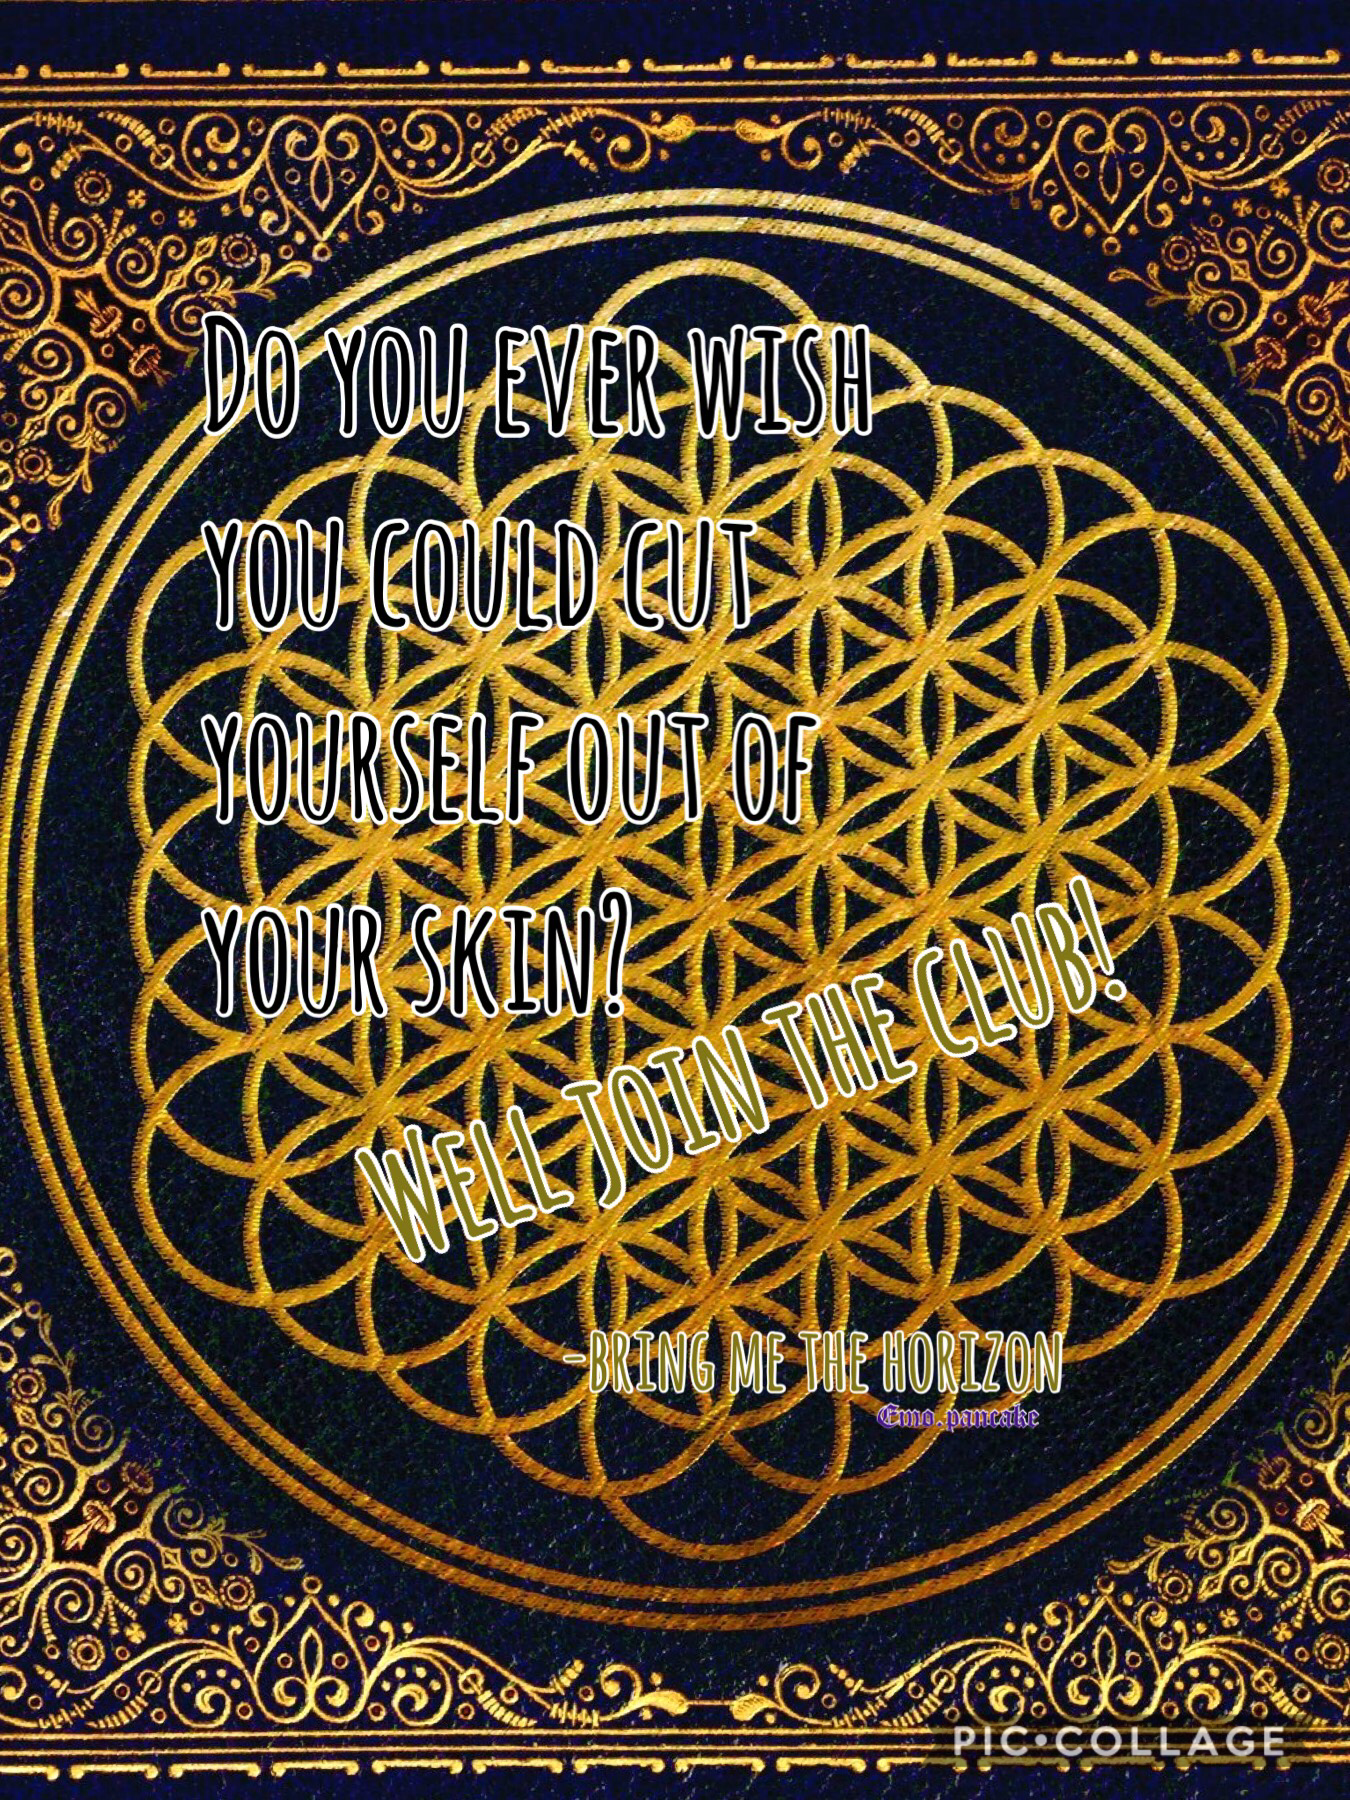 Join the club-bring me the horizon